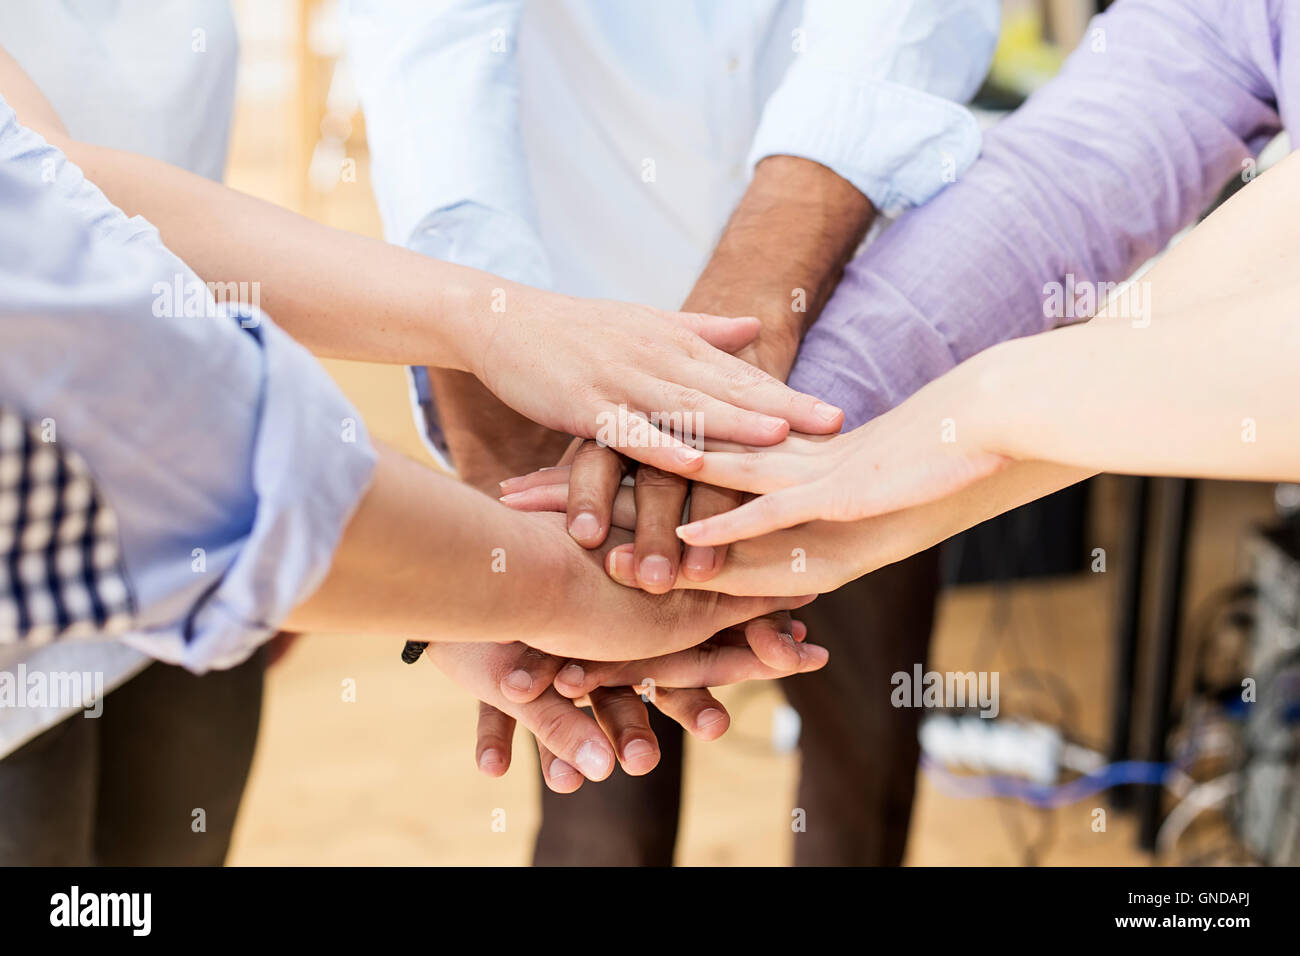 Close up view at group of hands holding together Stock Photo